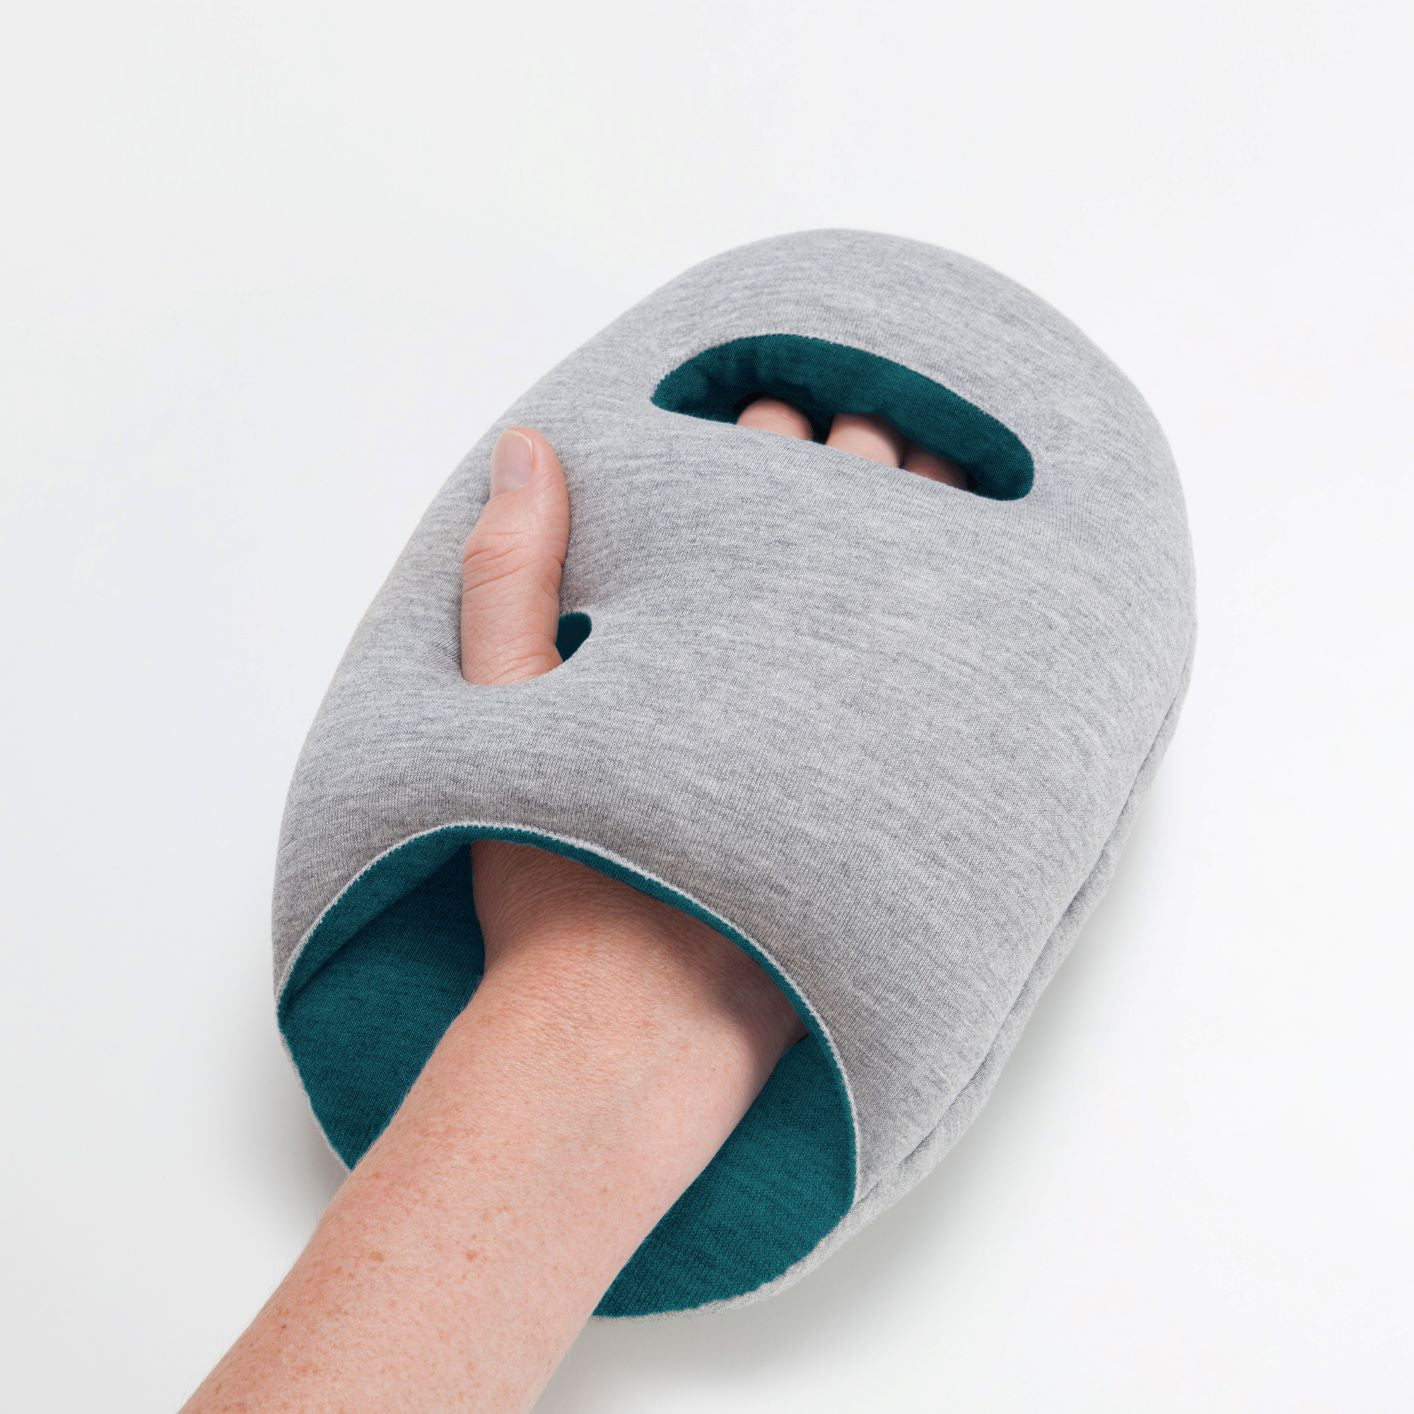 Blue Reef Mini Desk & Travel Pillow With Hand.